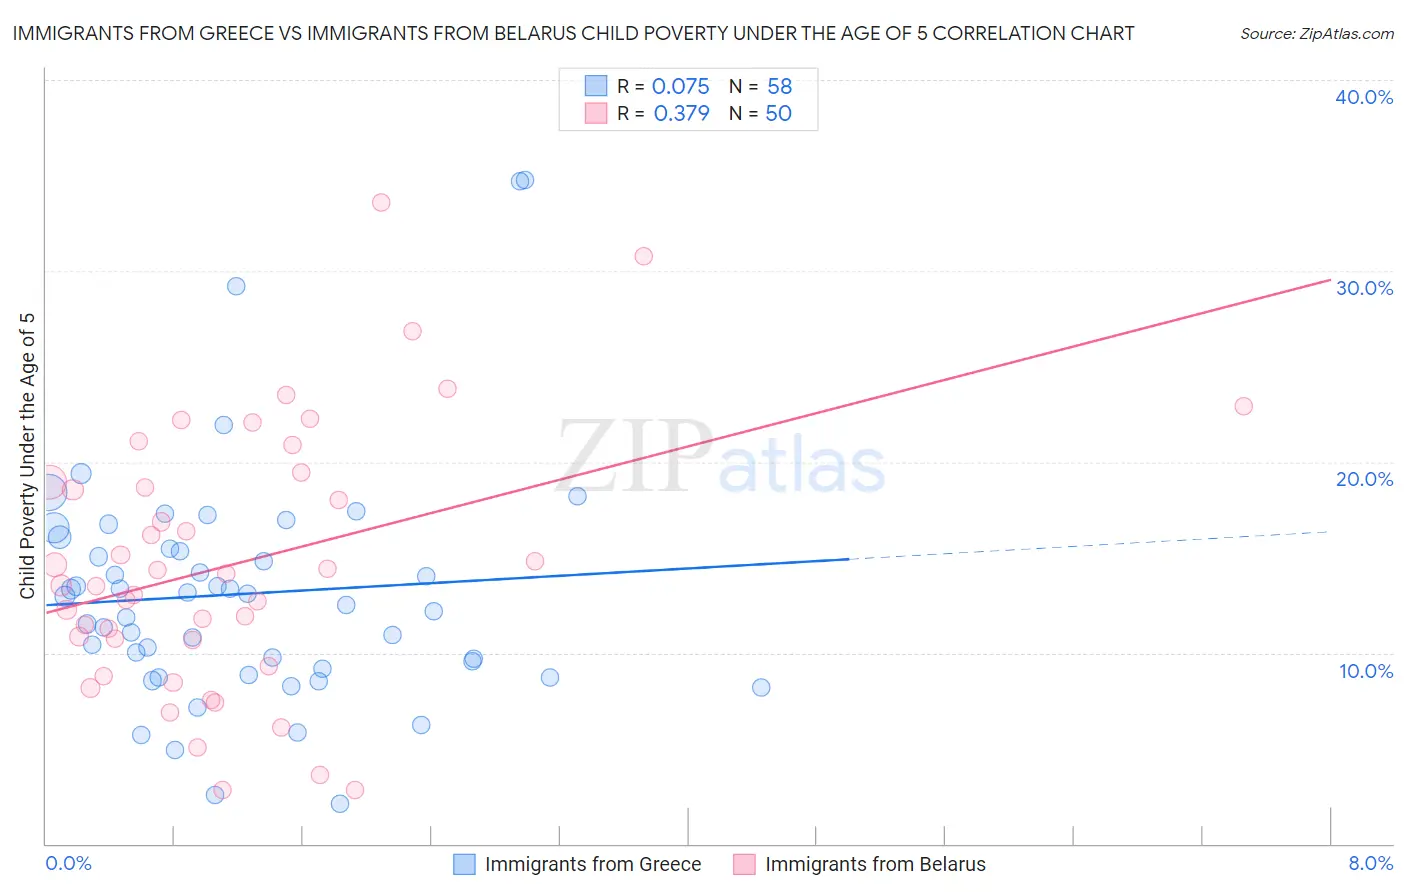 Immigrants from Greece vs Immigrants from Belarus Child Poverty Under the Age of 5